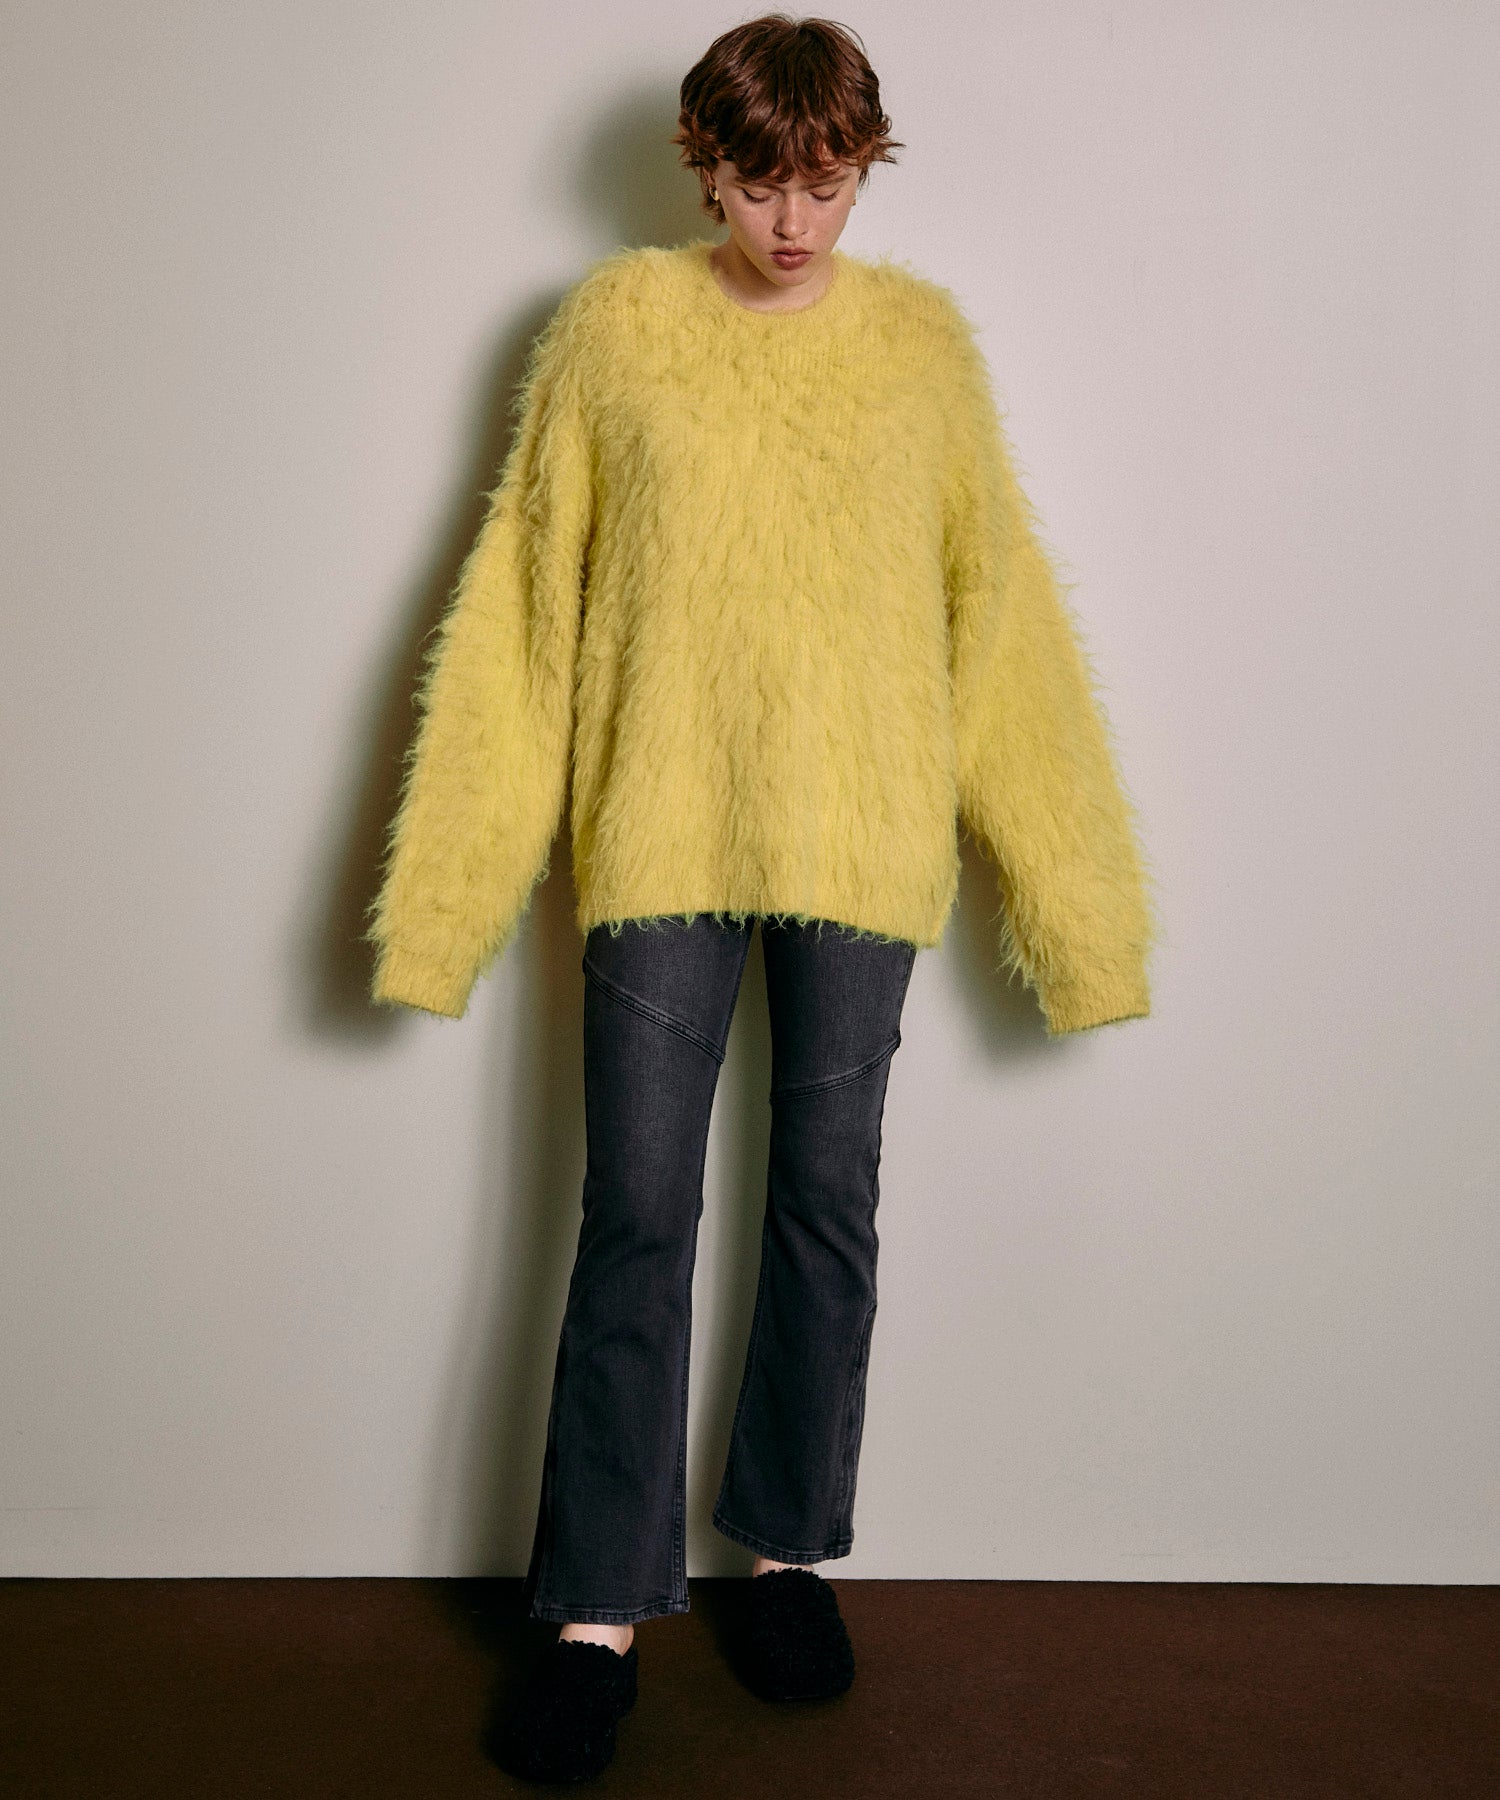 Shaggy Knit Pullover